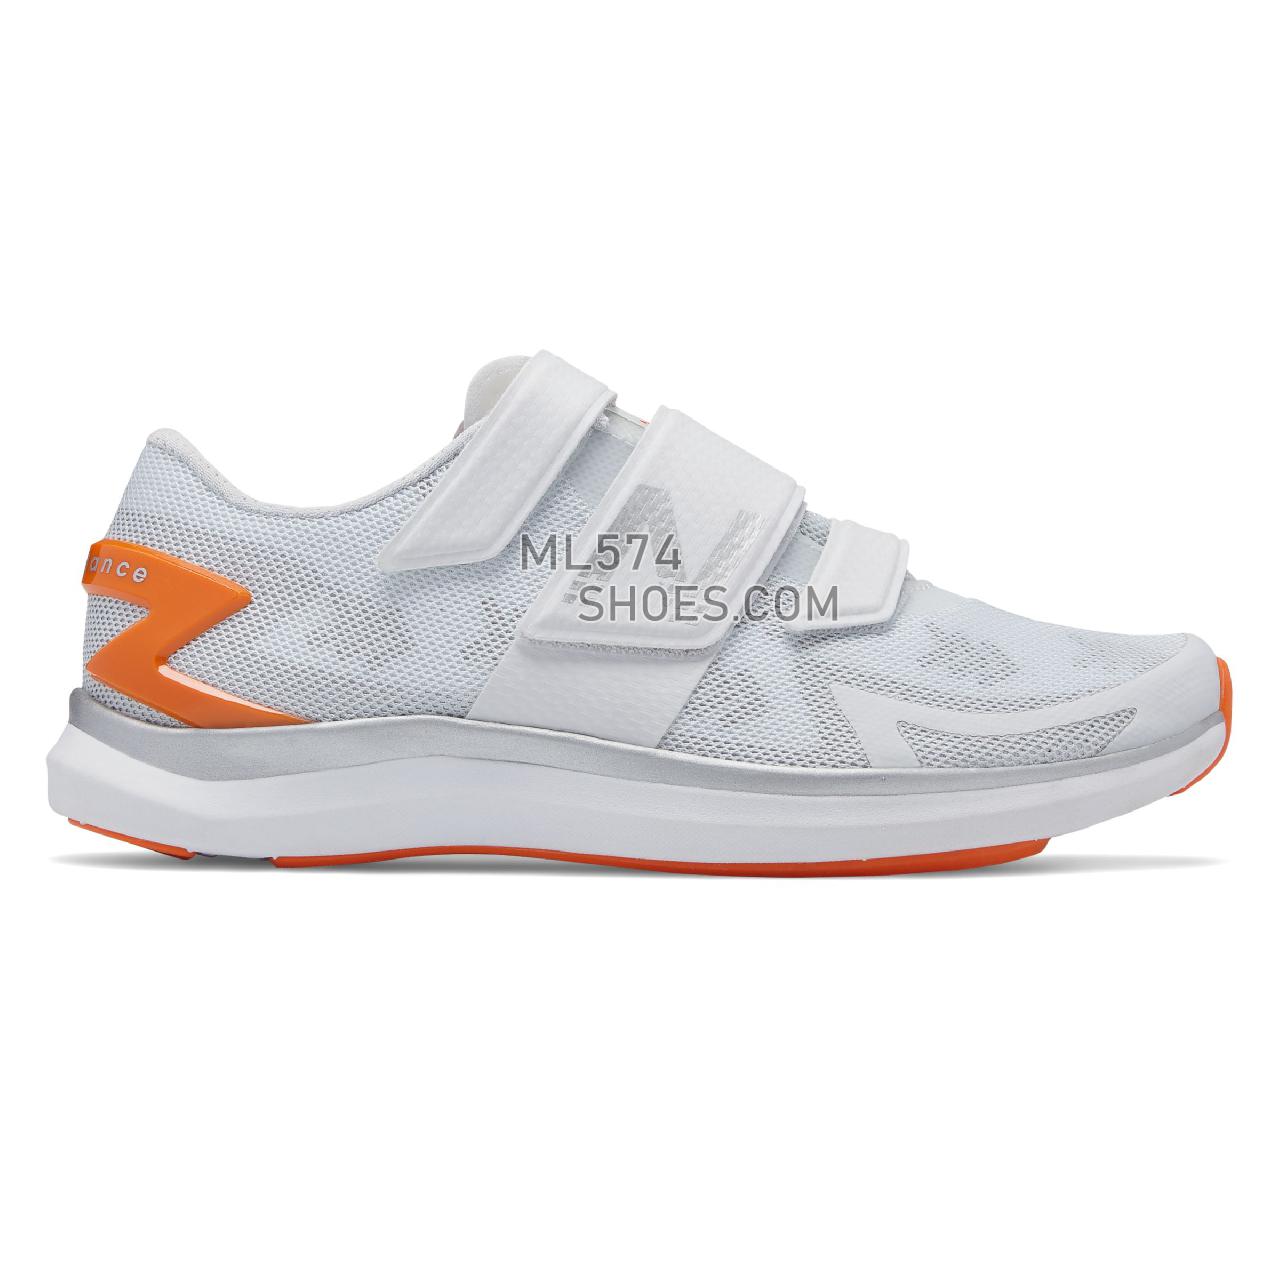 New Balance Cycle for Survival WX09 NBCycle - Women's 09 - X-training Arctic Fox with Orange - WX09CS